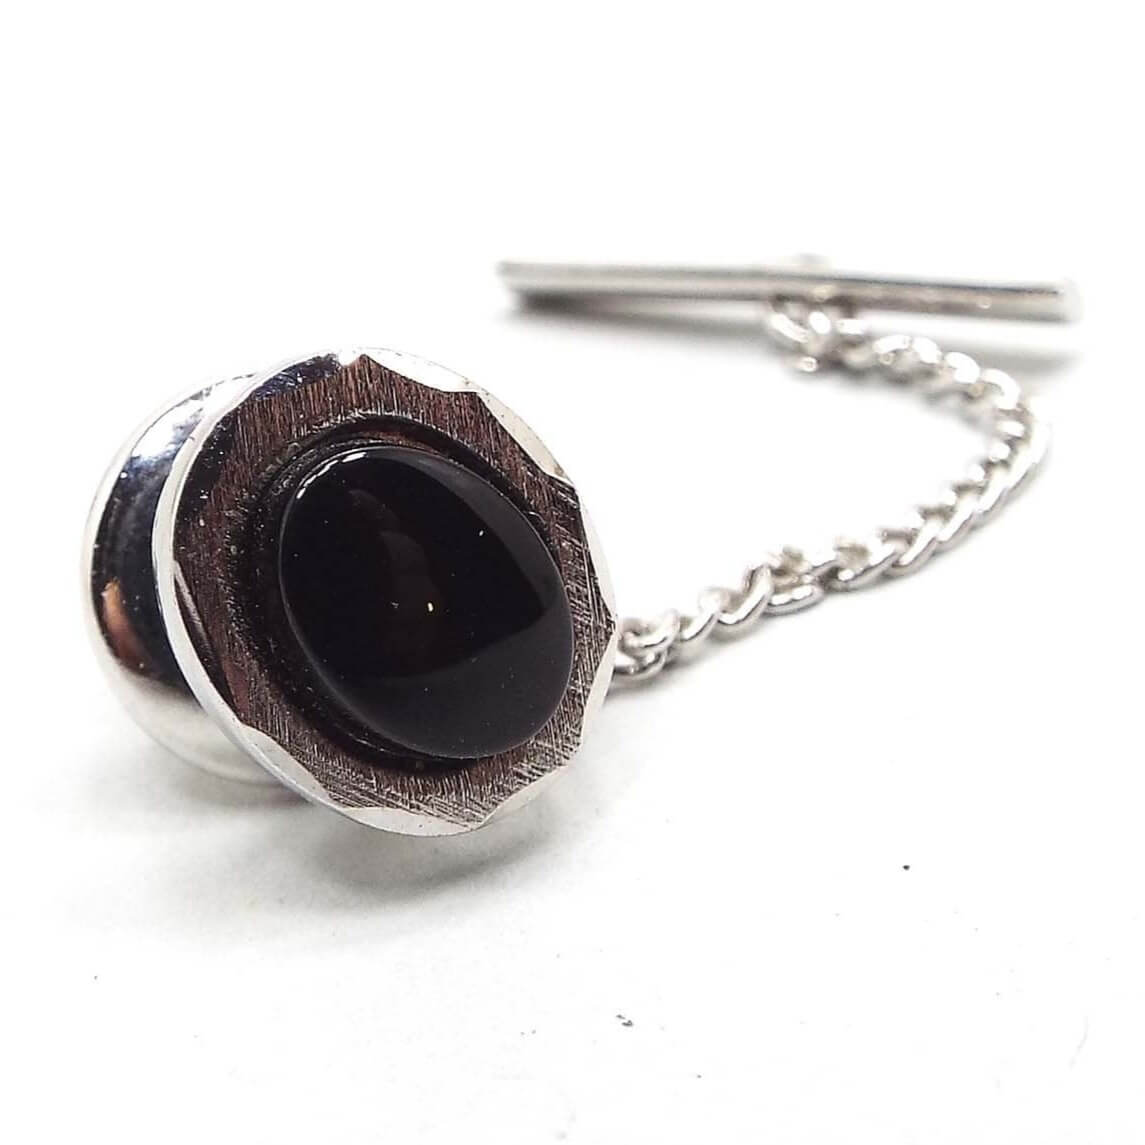 JL USA Sterling Silver and Onyx Vintage Tie Tack, Gemstone Tie Pin